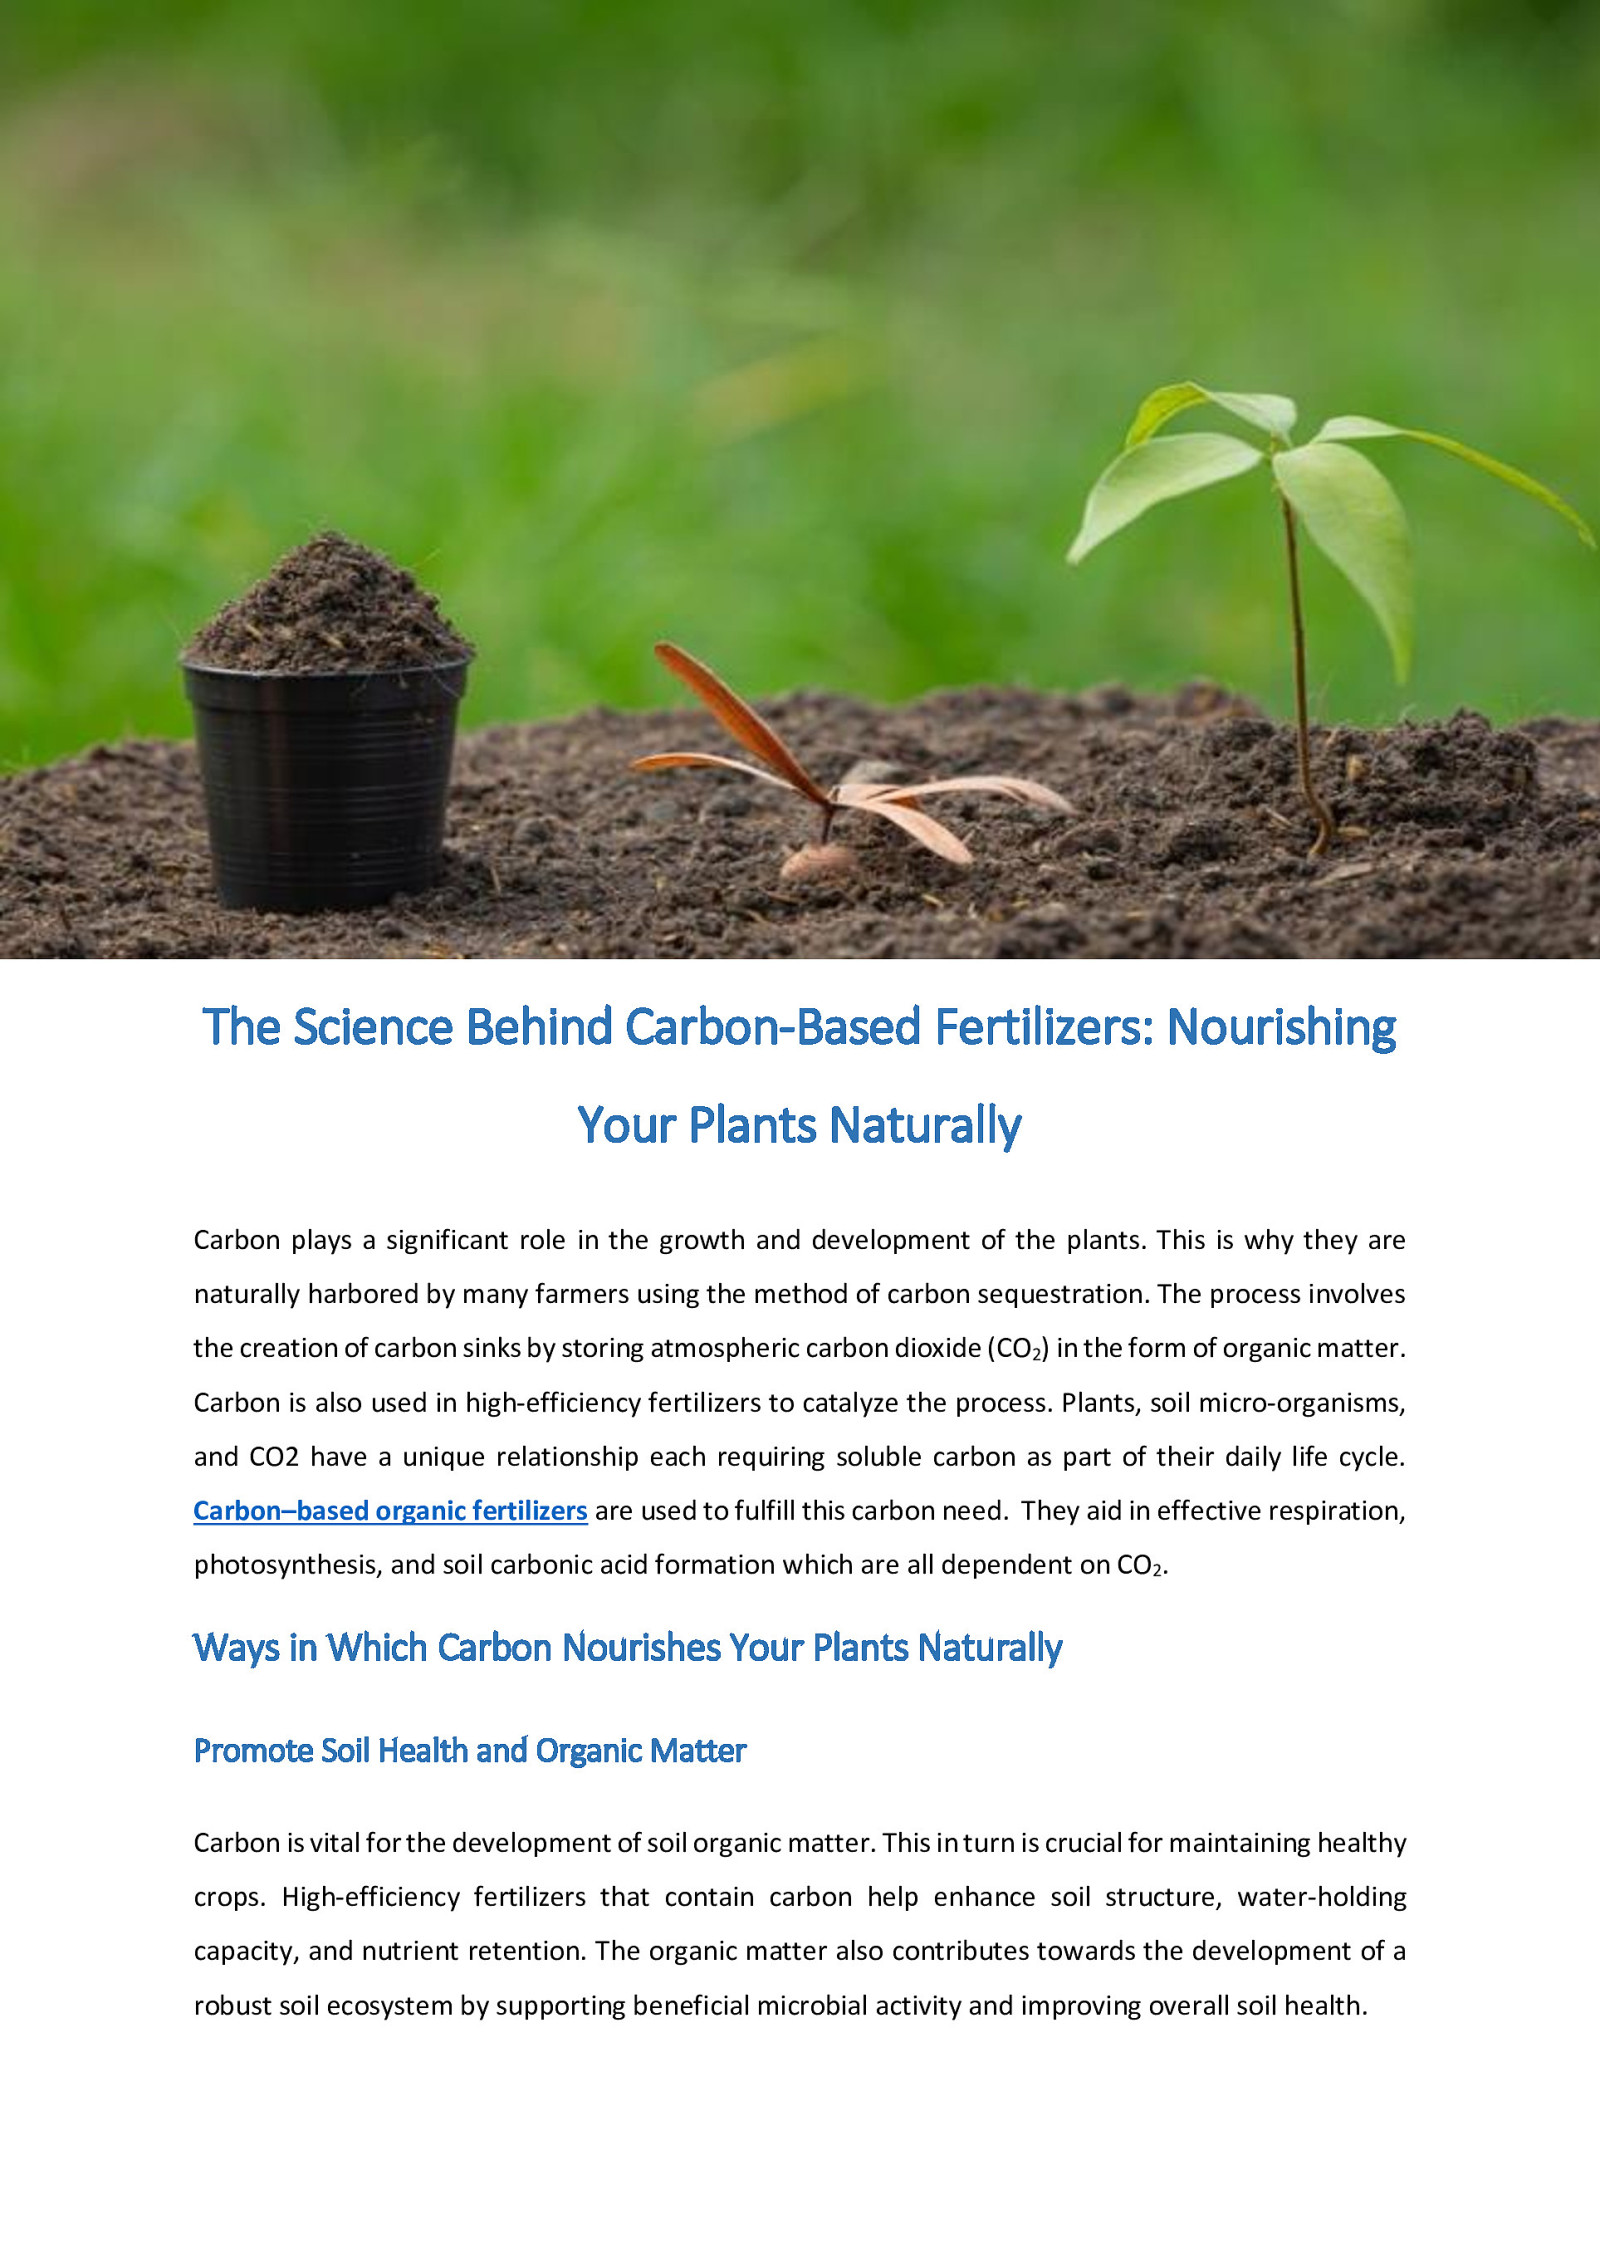 The Science Behind Carbon-Based Fertilizers: Nourishing Your Plants Naturally